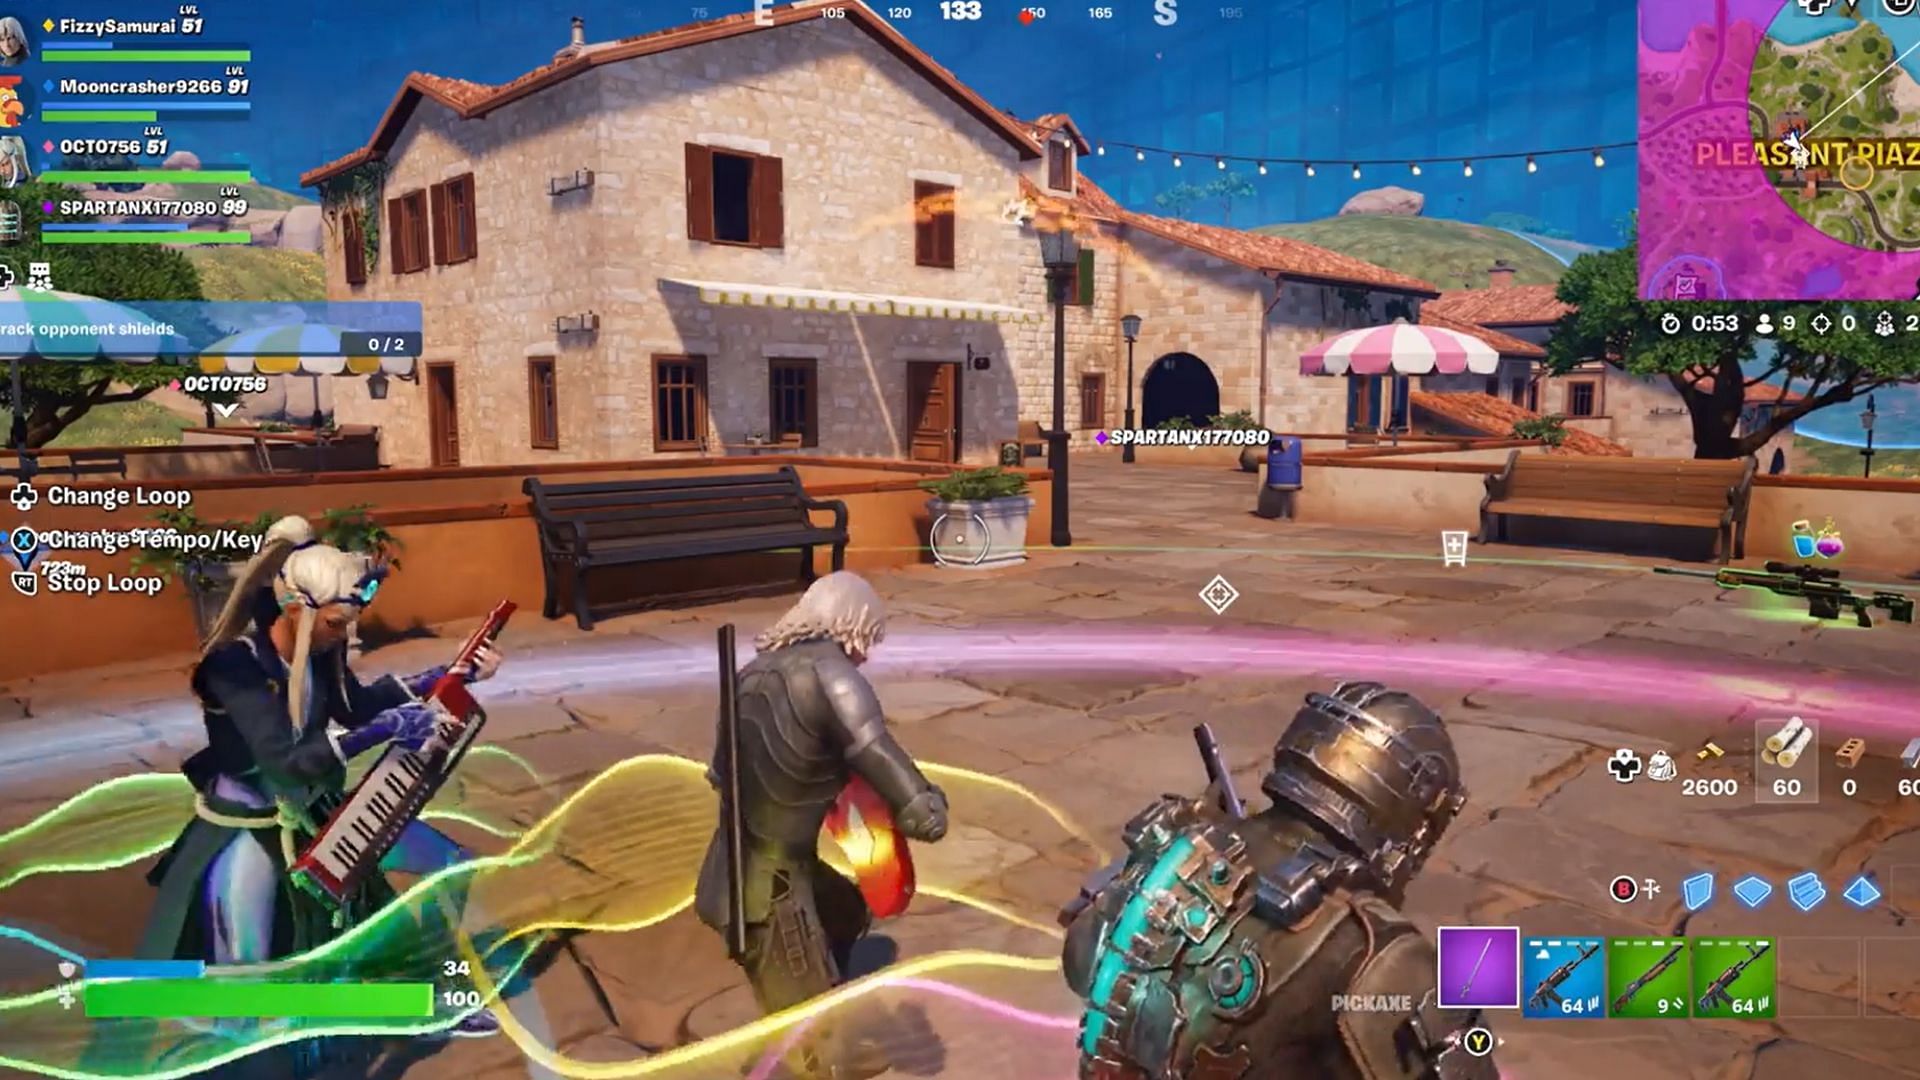 Fortnite concert cut short after opponents open fire, community states it